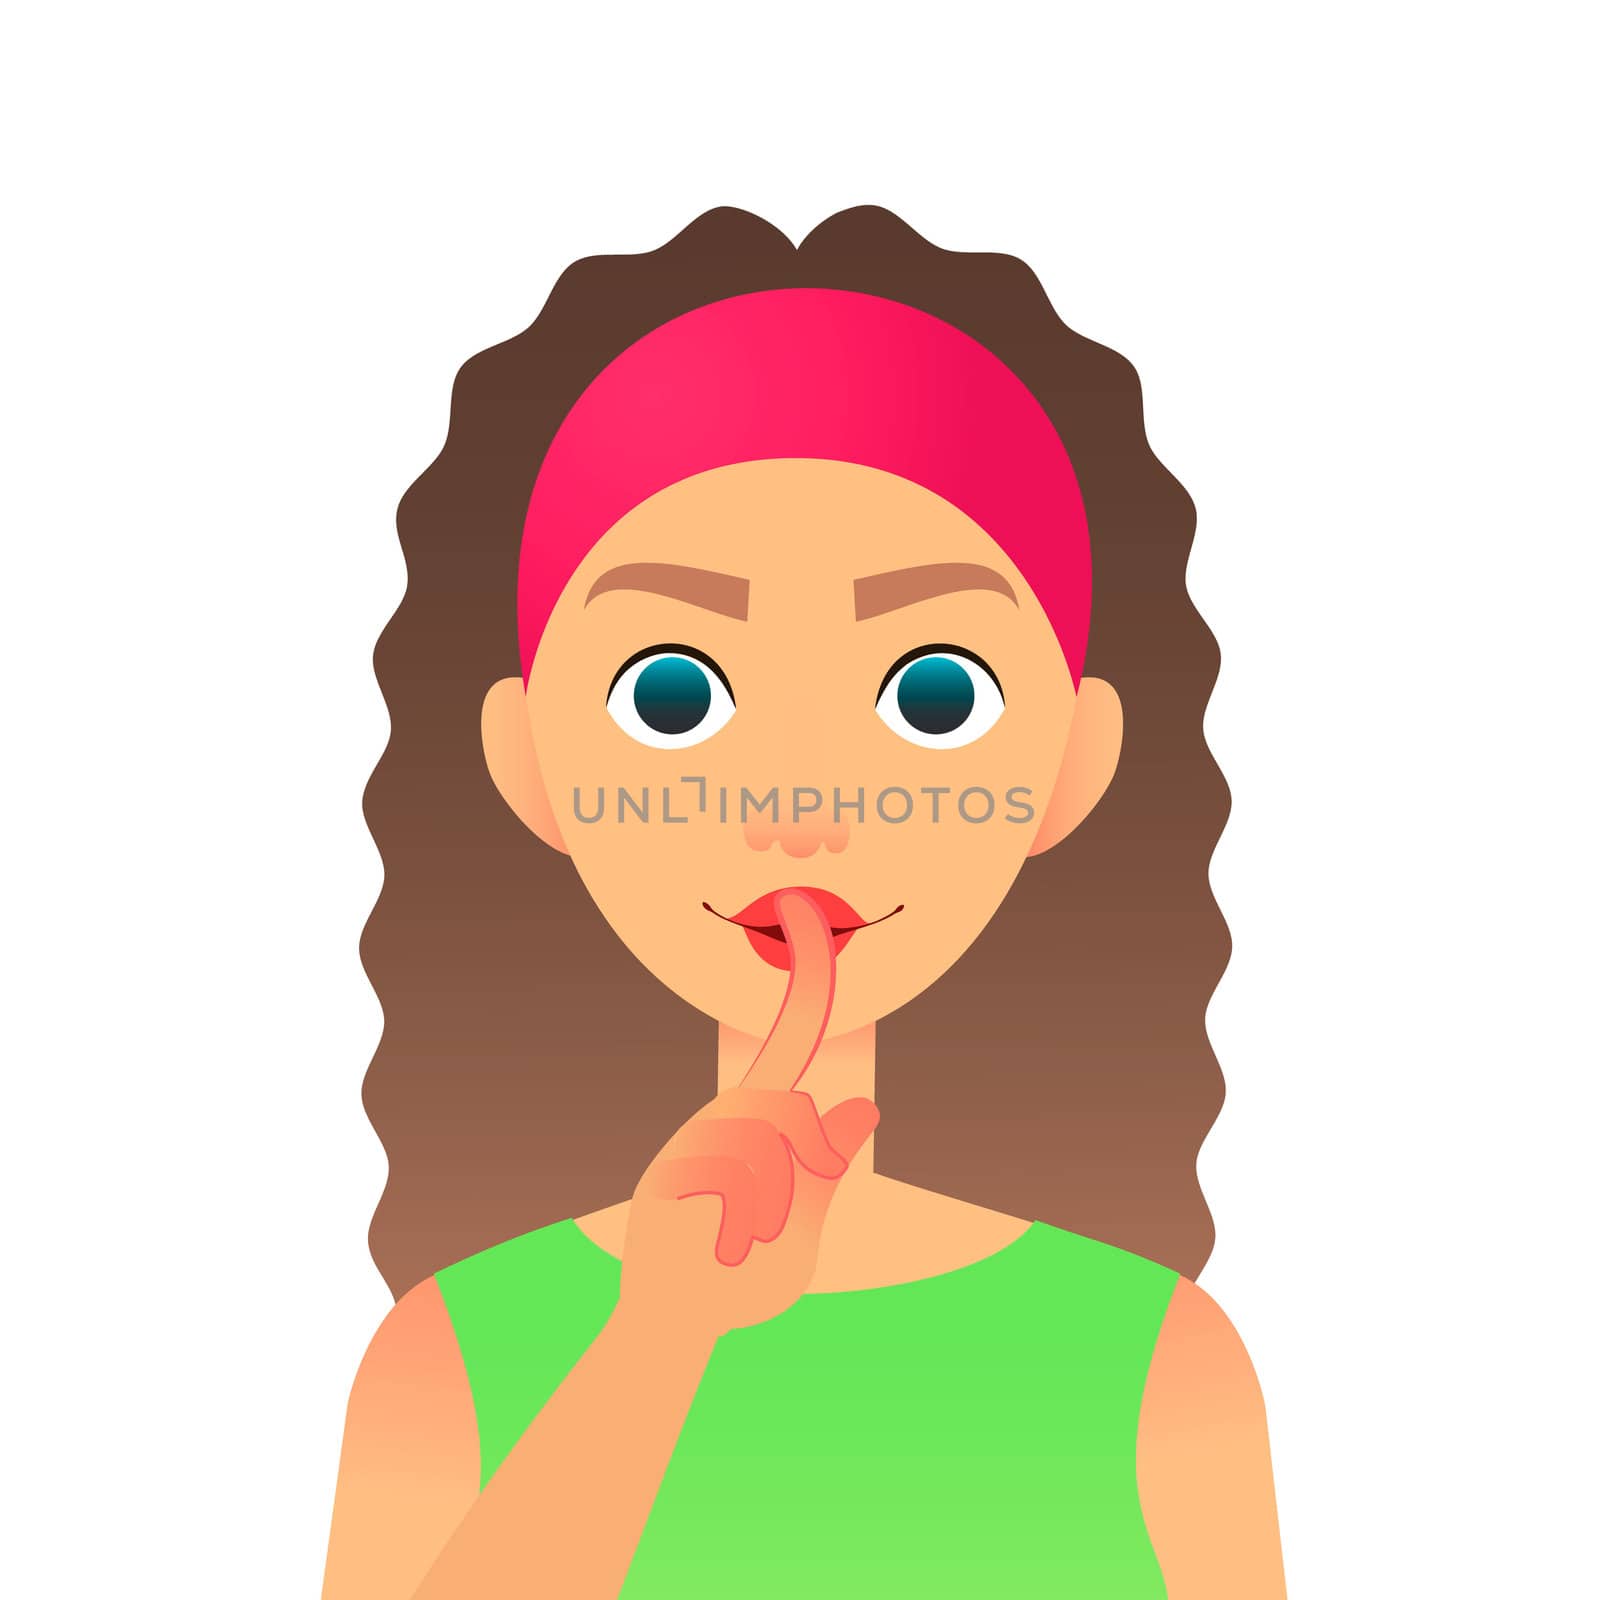 Cartoon beautiful woman saying hush be quiet with finger on lips gesture. Flat secret girl. Female silent gesture with finger. Shhh symbol